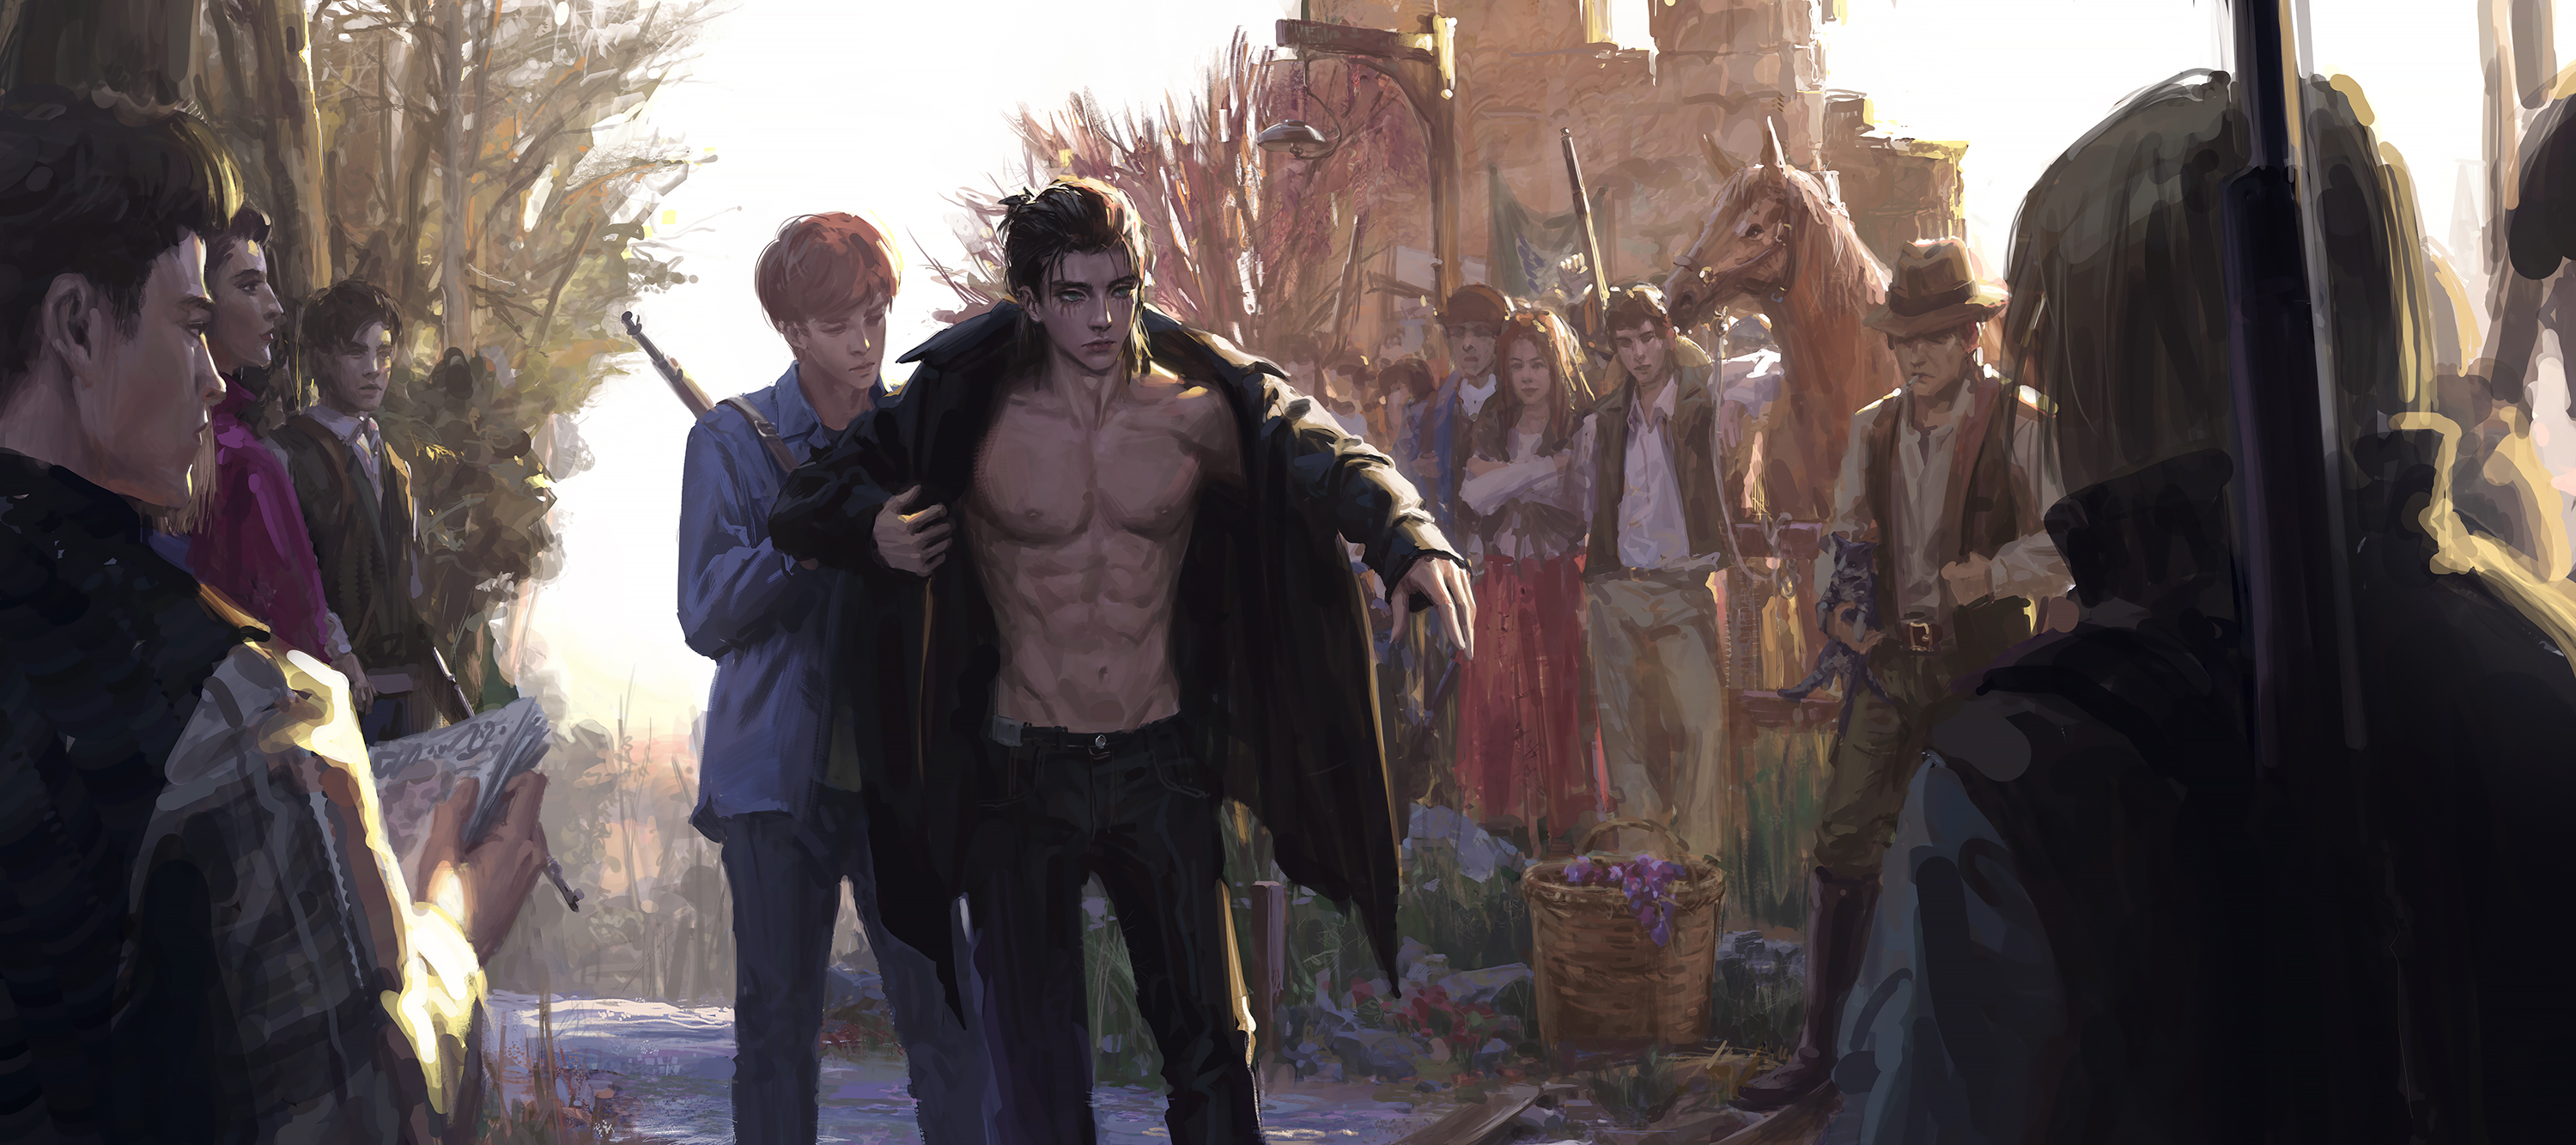 Anime 3000x1333 Shingeki no Kyojin 6-pack abs muscles anime boys black jackets black pants shirtless looking away rifles cats Eren Jeager Floch Forster 2D anime realistic fan art short hair long hair green eyes closed eyes